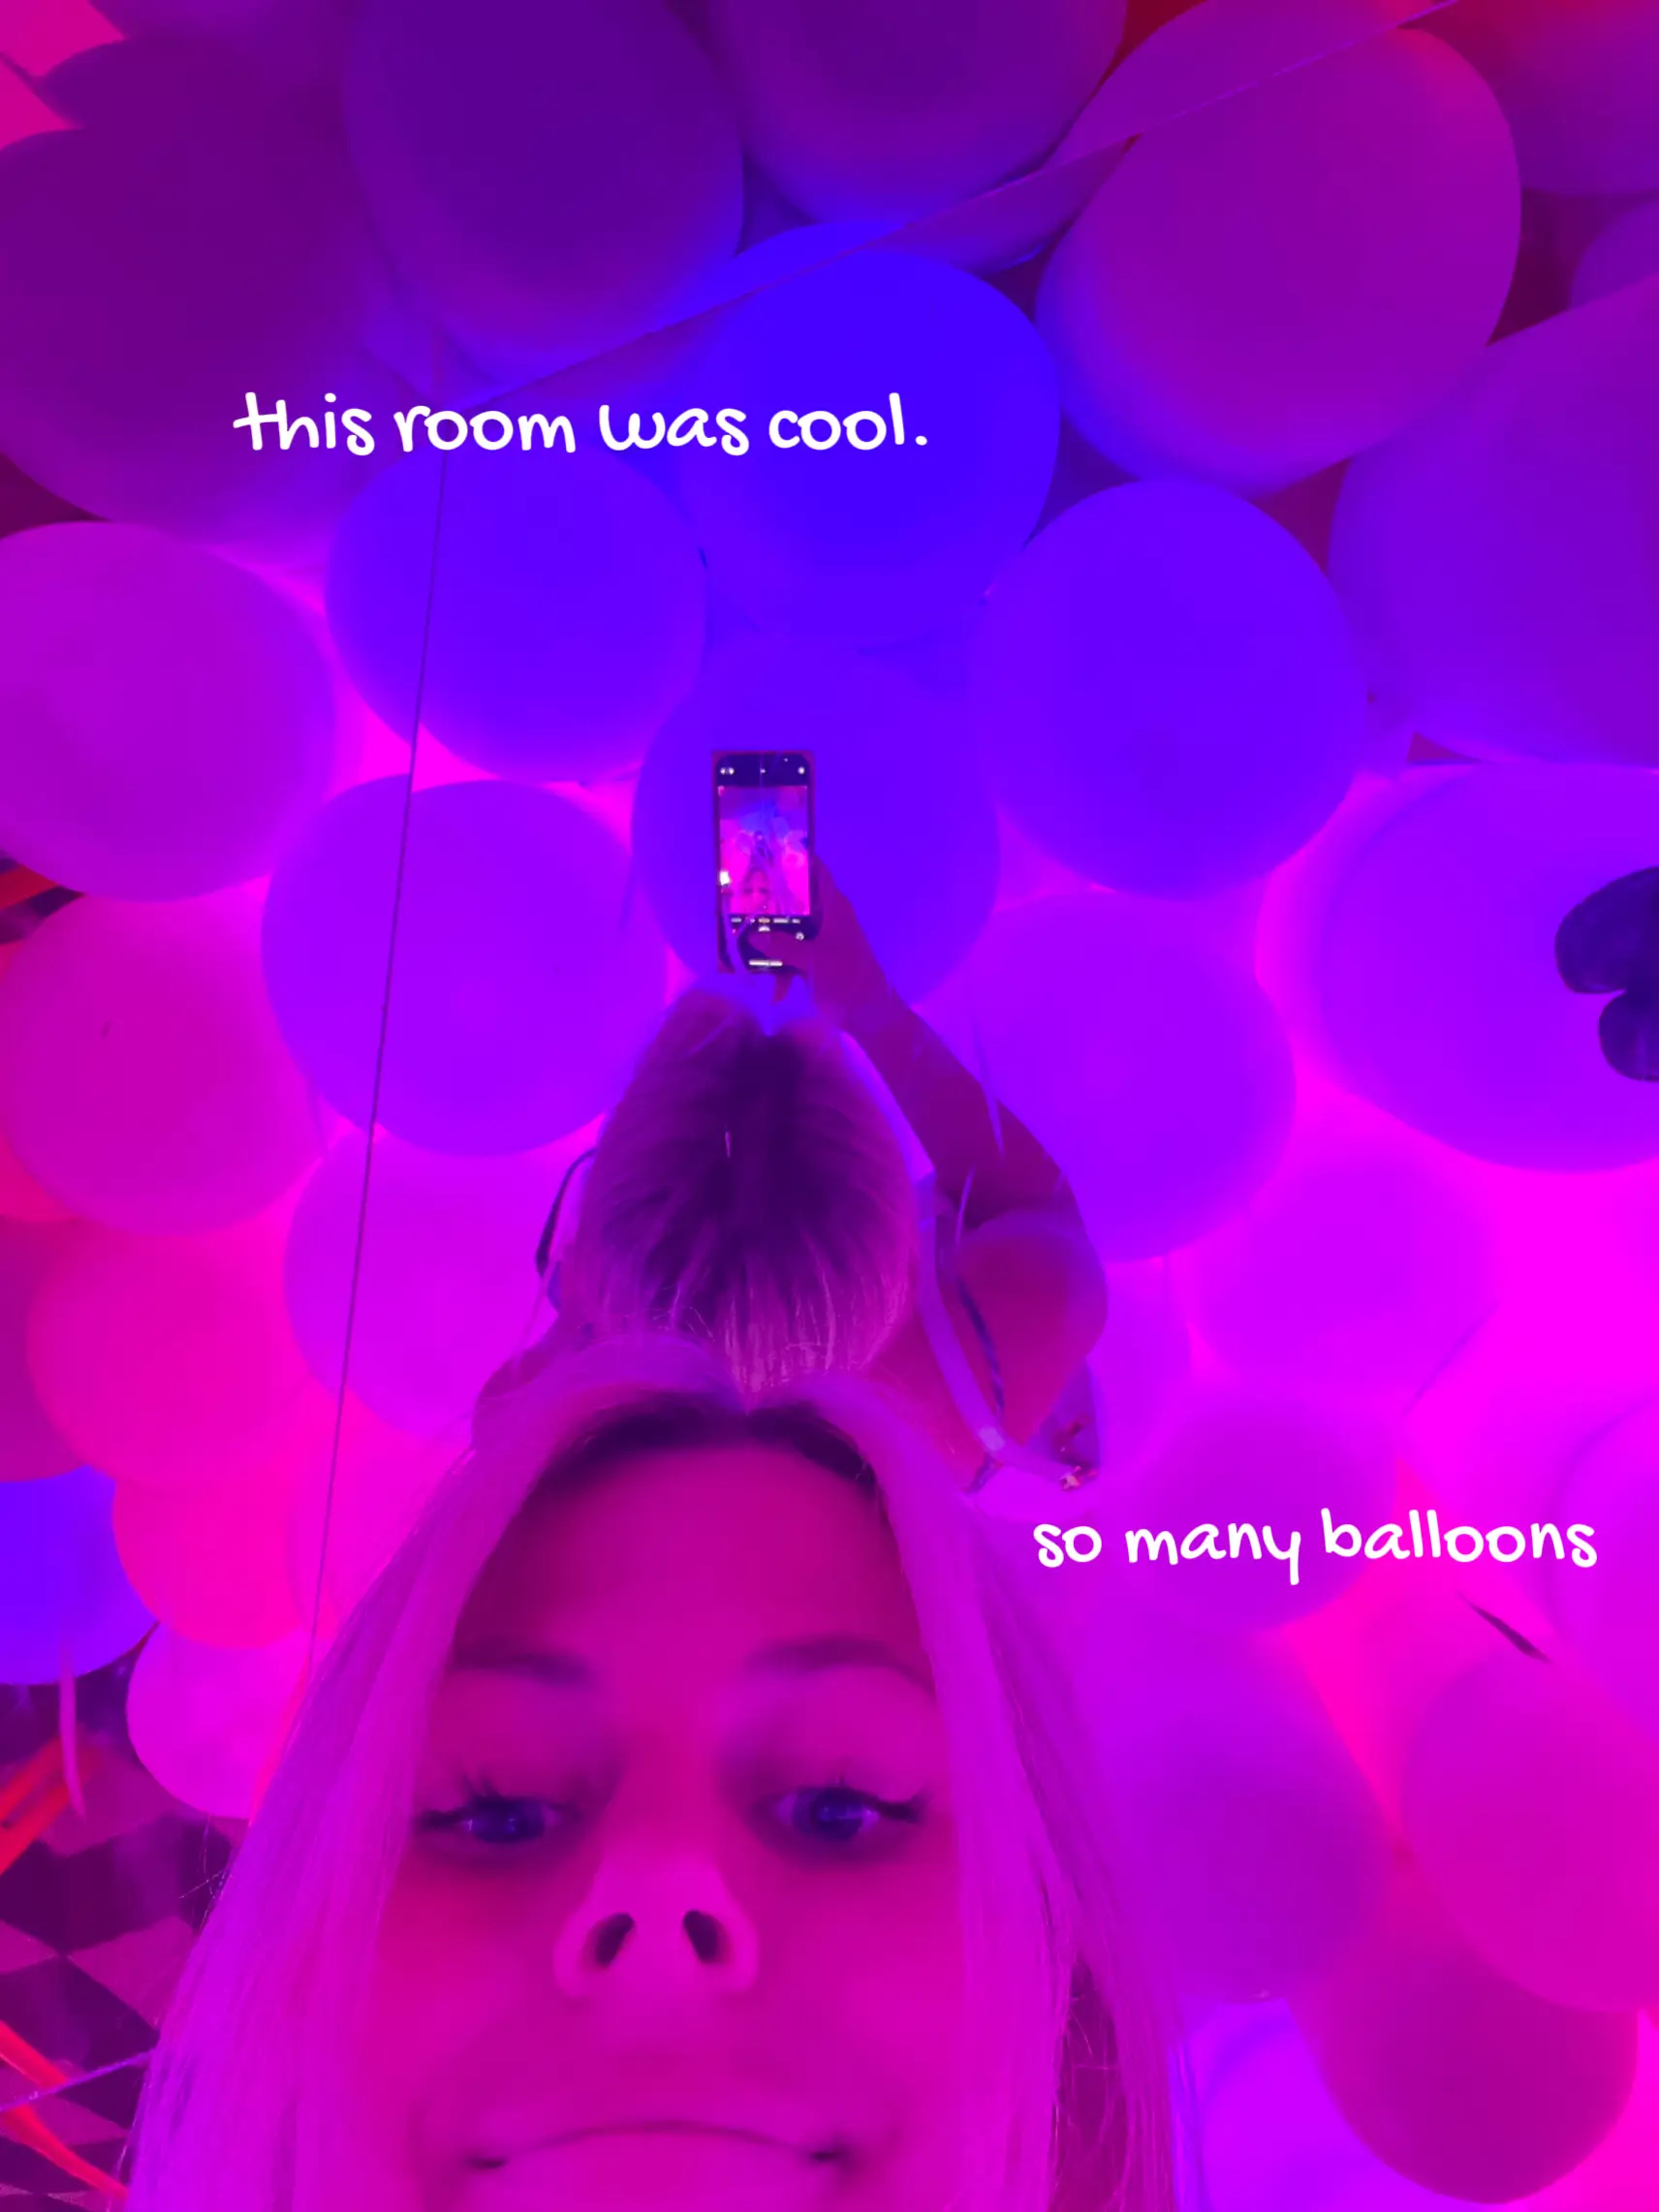  A woman is taking a selfie in a room with many balloons.